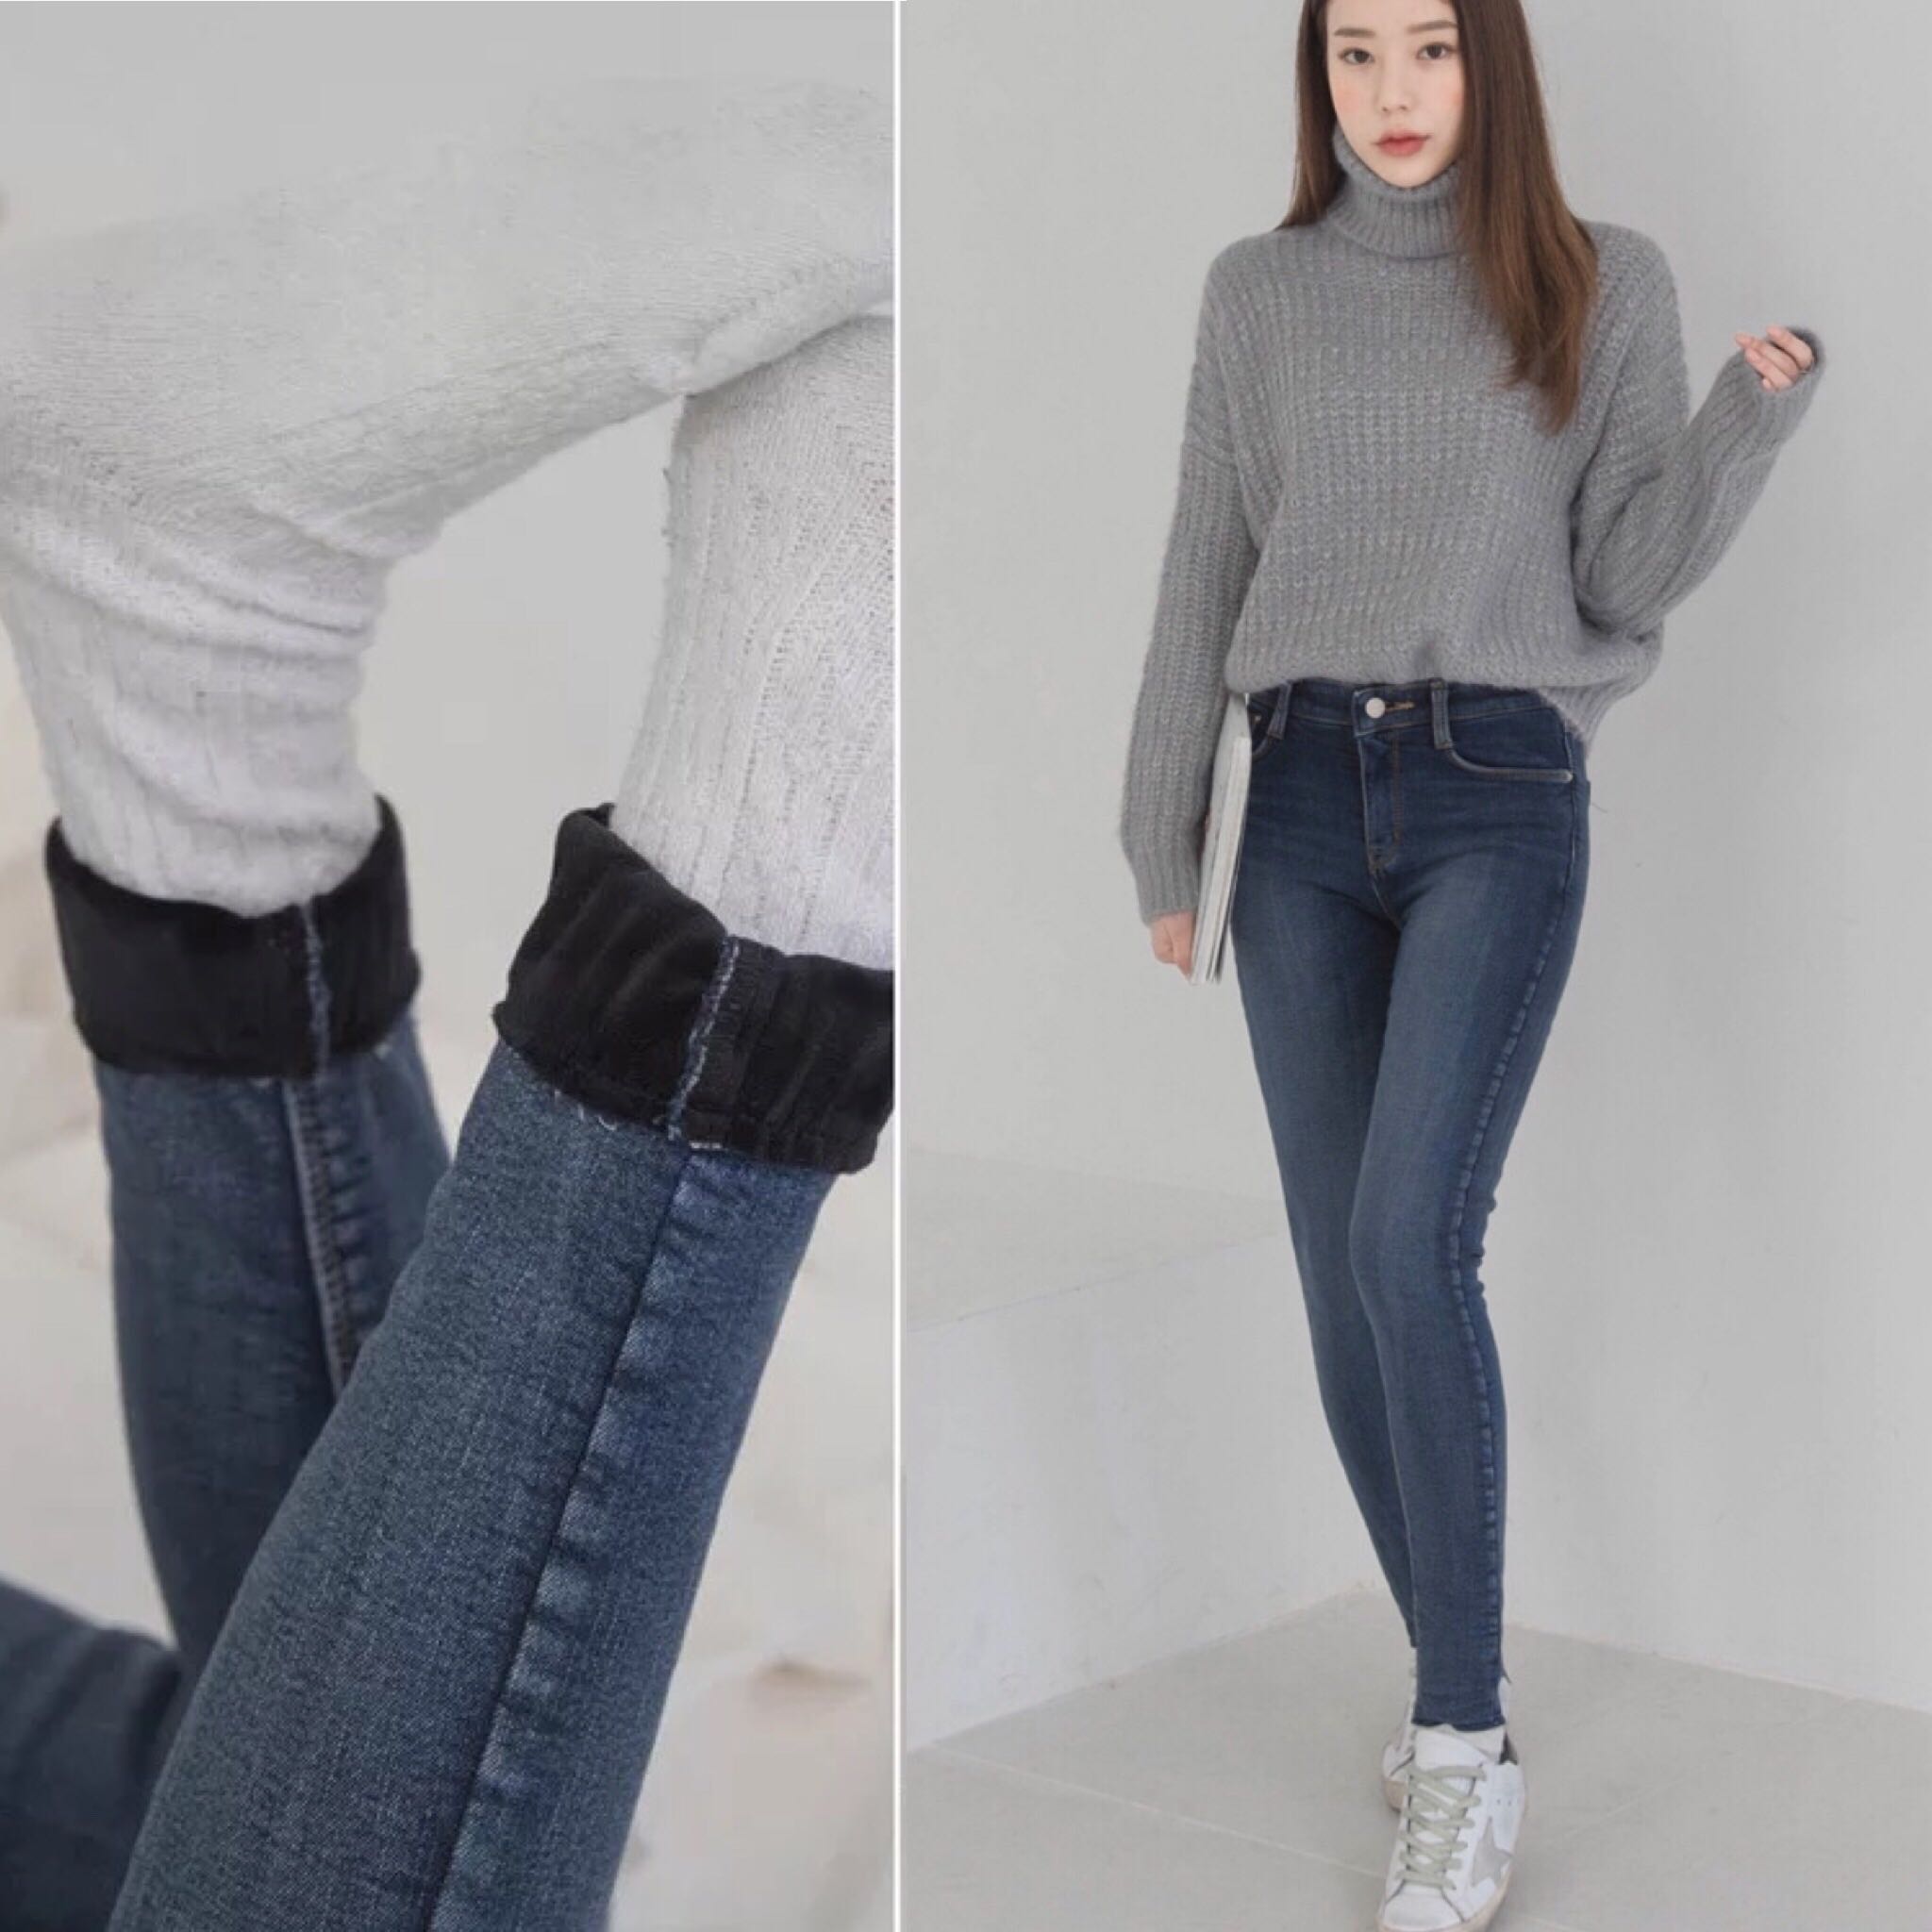 thick jeans womens